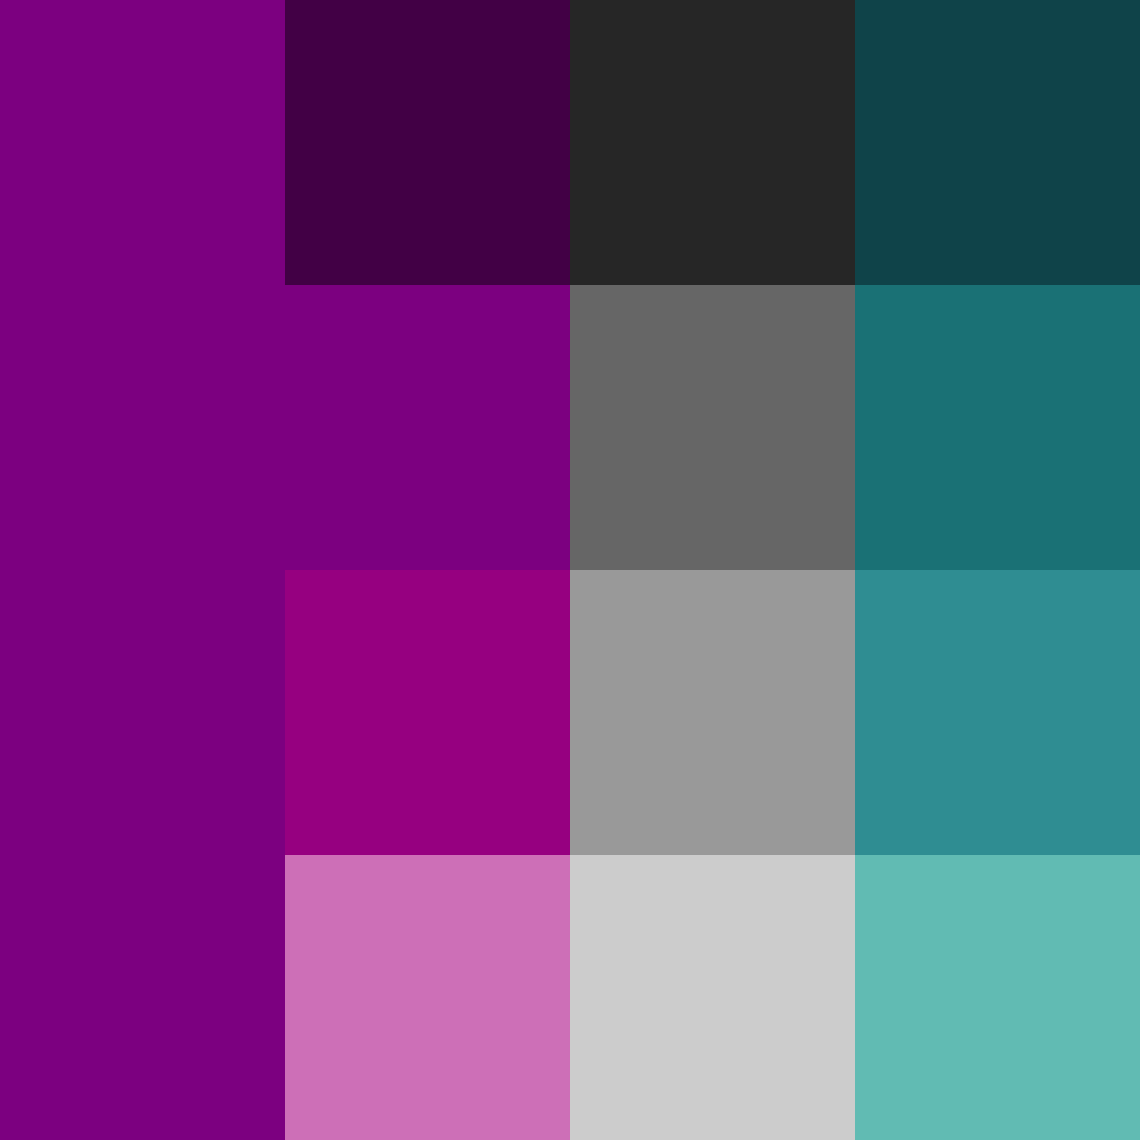 The color palette designed for Amsive showing different shades of purple, gray, and green.